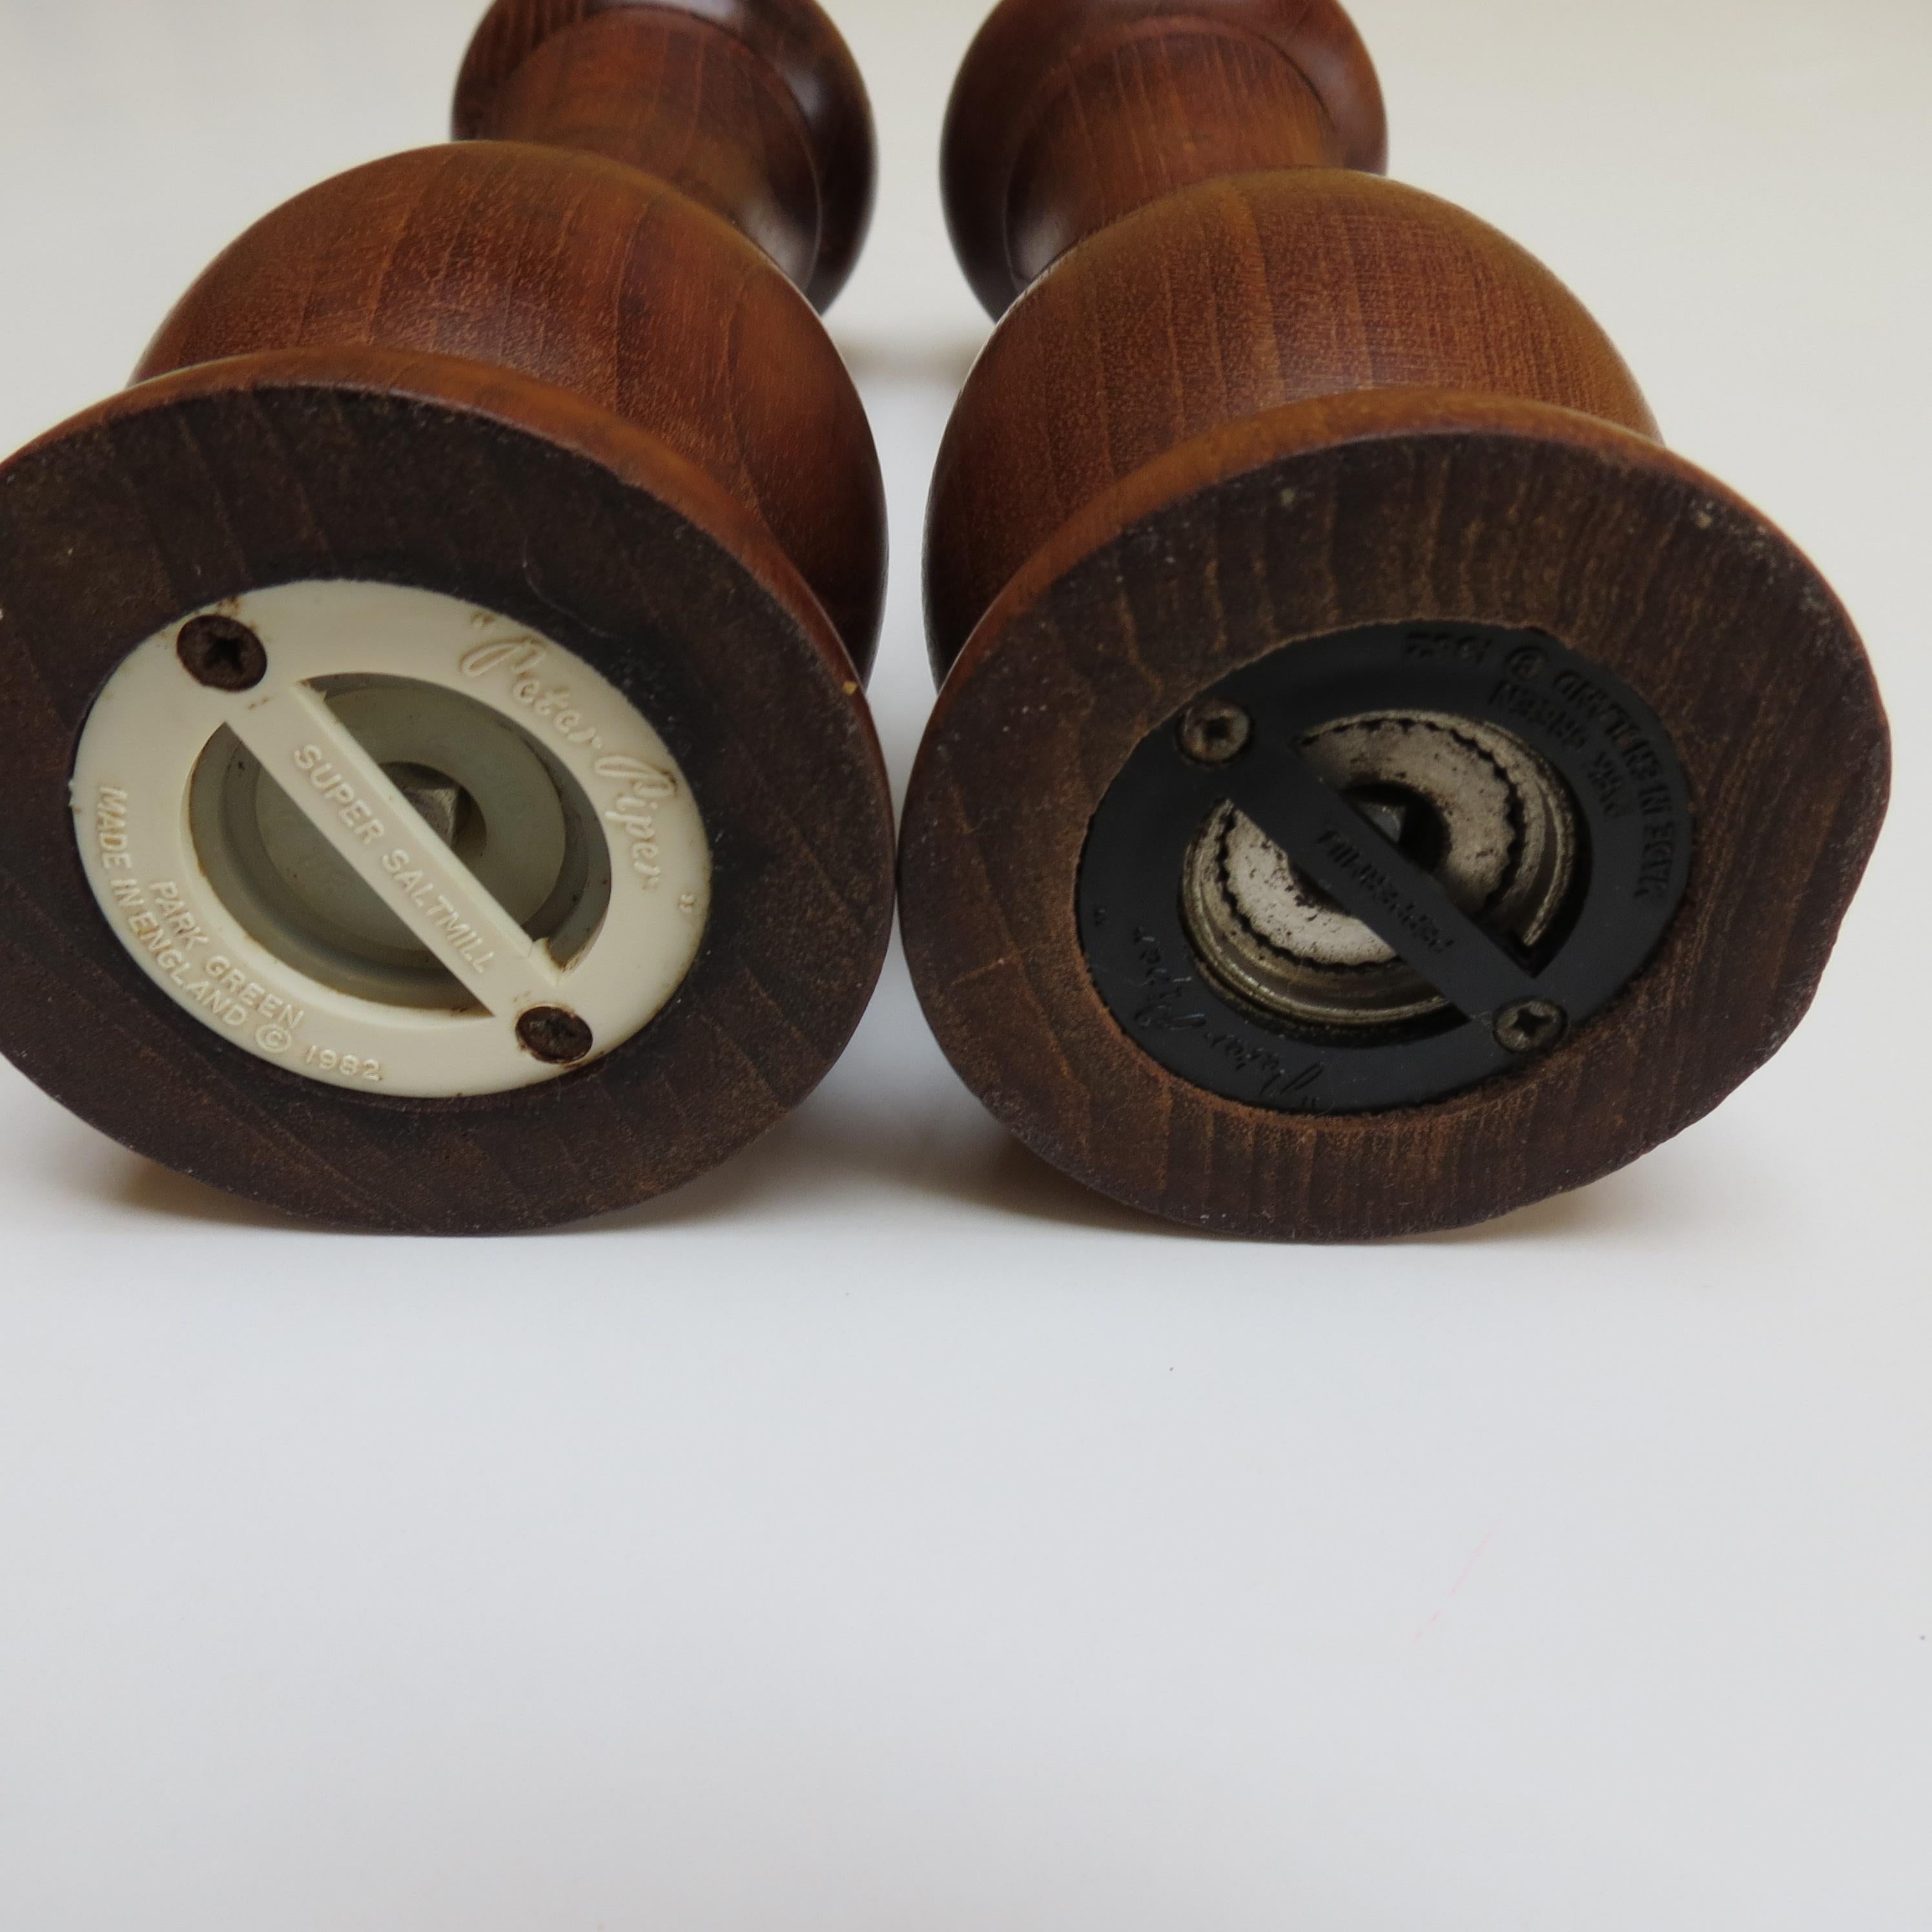 Vintage Teak Salt And Pepper Grinders By Peter Piper Super Salt And Pepper Mill  In Good Condition For Sale In Stow on the Wold, GB